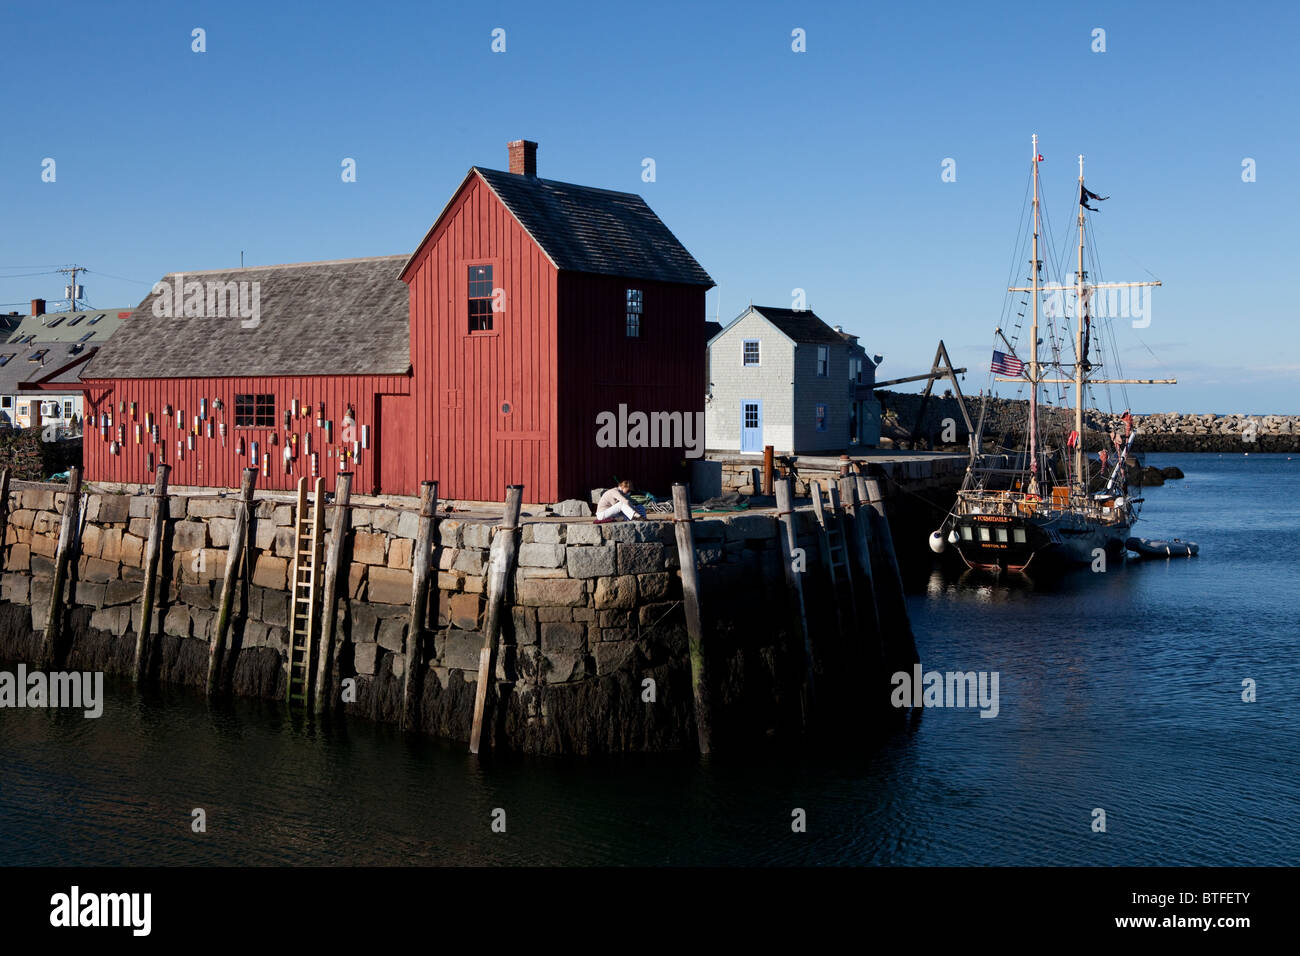 Motif #1 with the schooner Formidable at the dock. Stock Photo